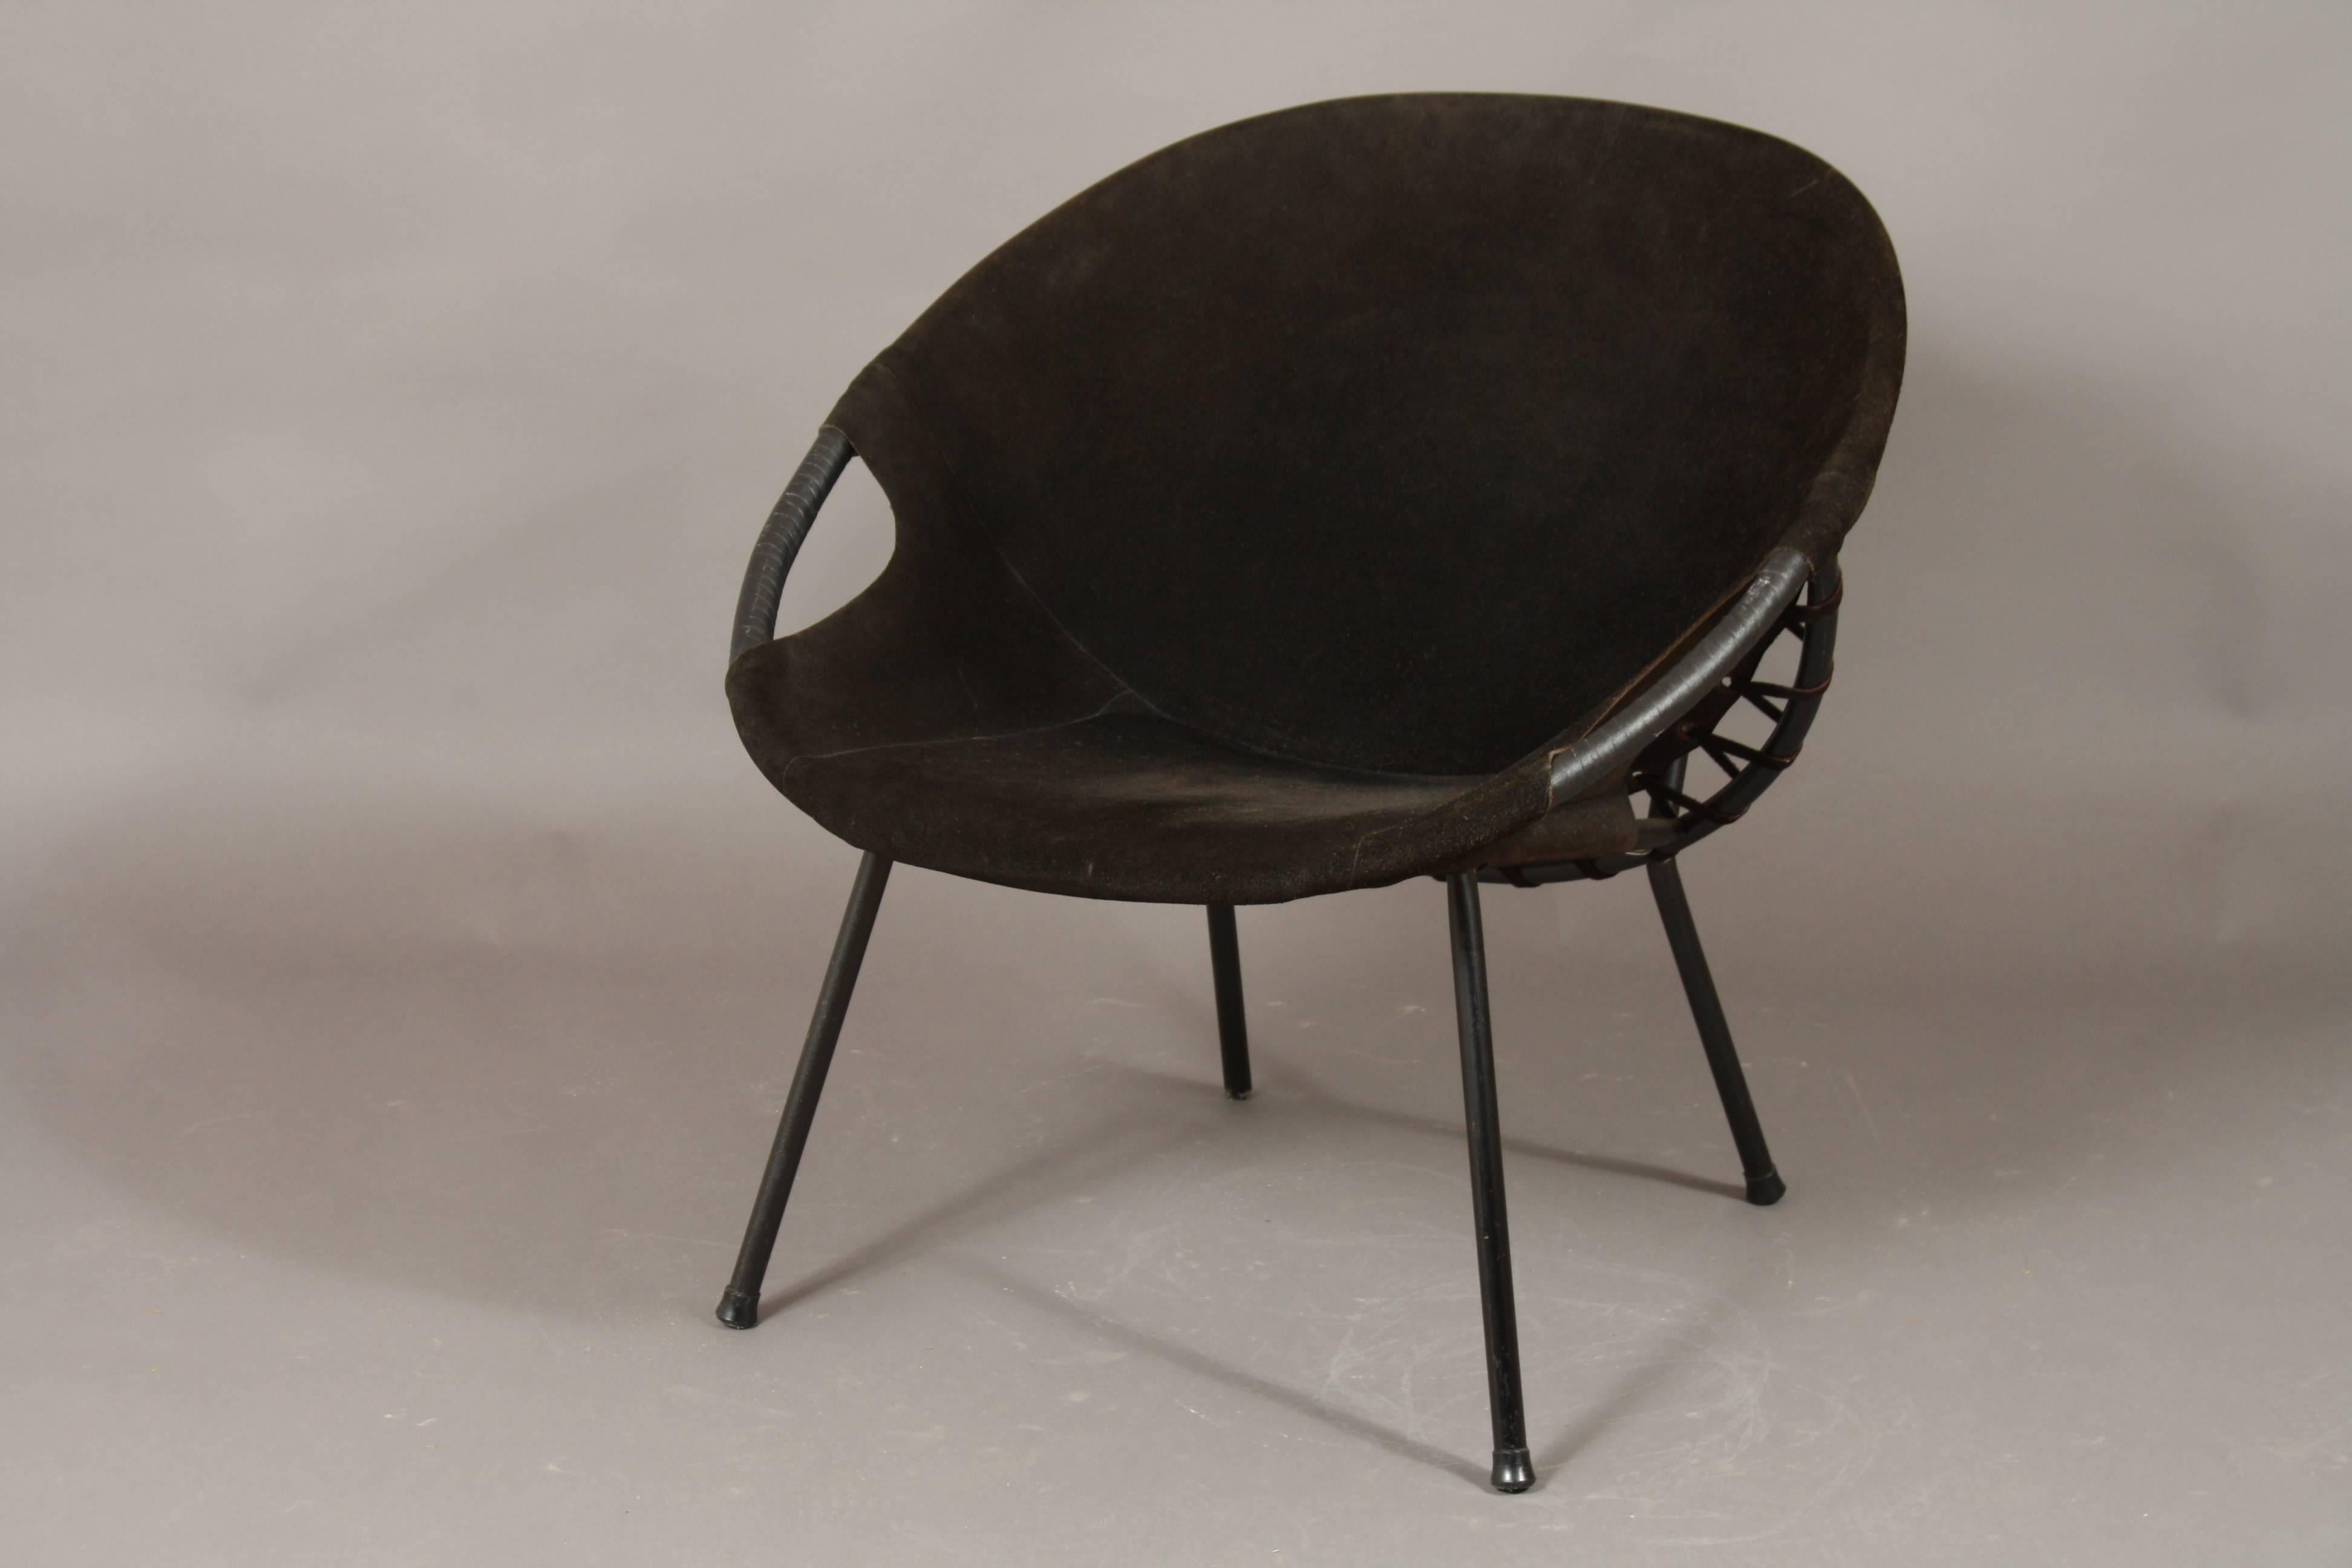 Pair of circle armchairs by Lusch Erzeugnis designed for Lusch Co. The armchairs were produced in the 1960s. The frame is black metal and the seat in very dark almost black suede. One of them is slightly lighter because of use.